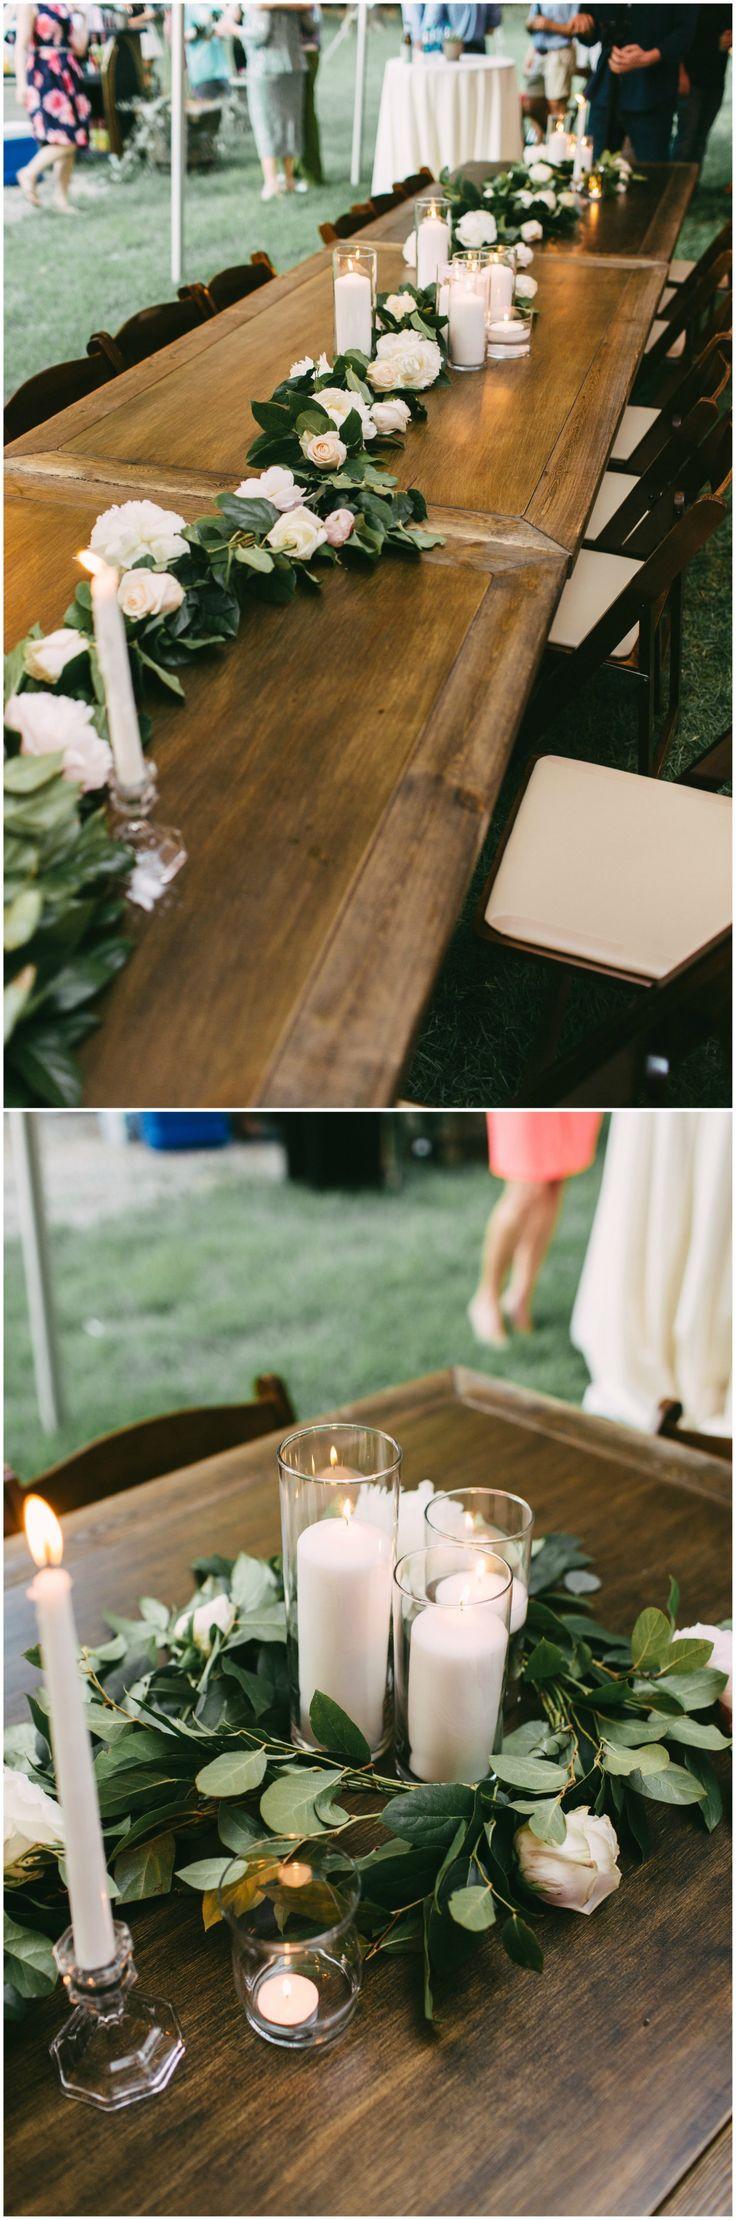 Wedding - Natural Outdoor Nuptials In Tennessee - Memphis, TN